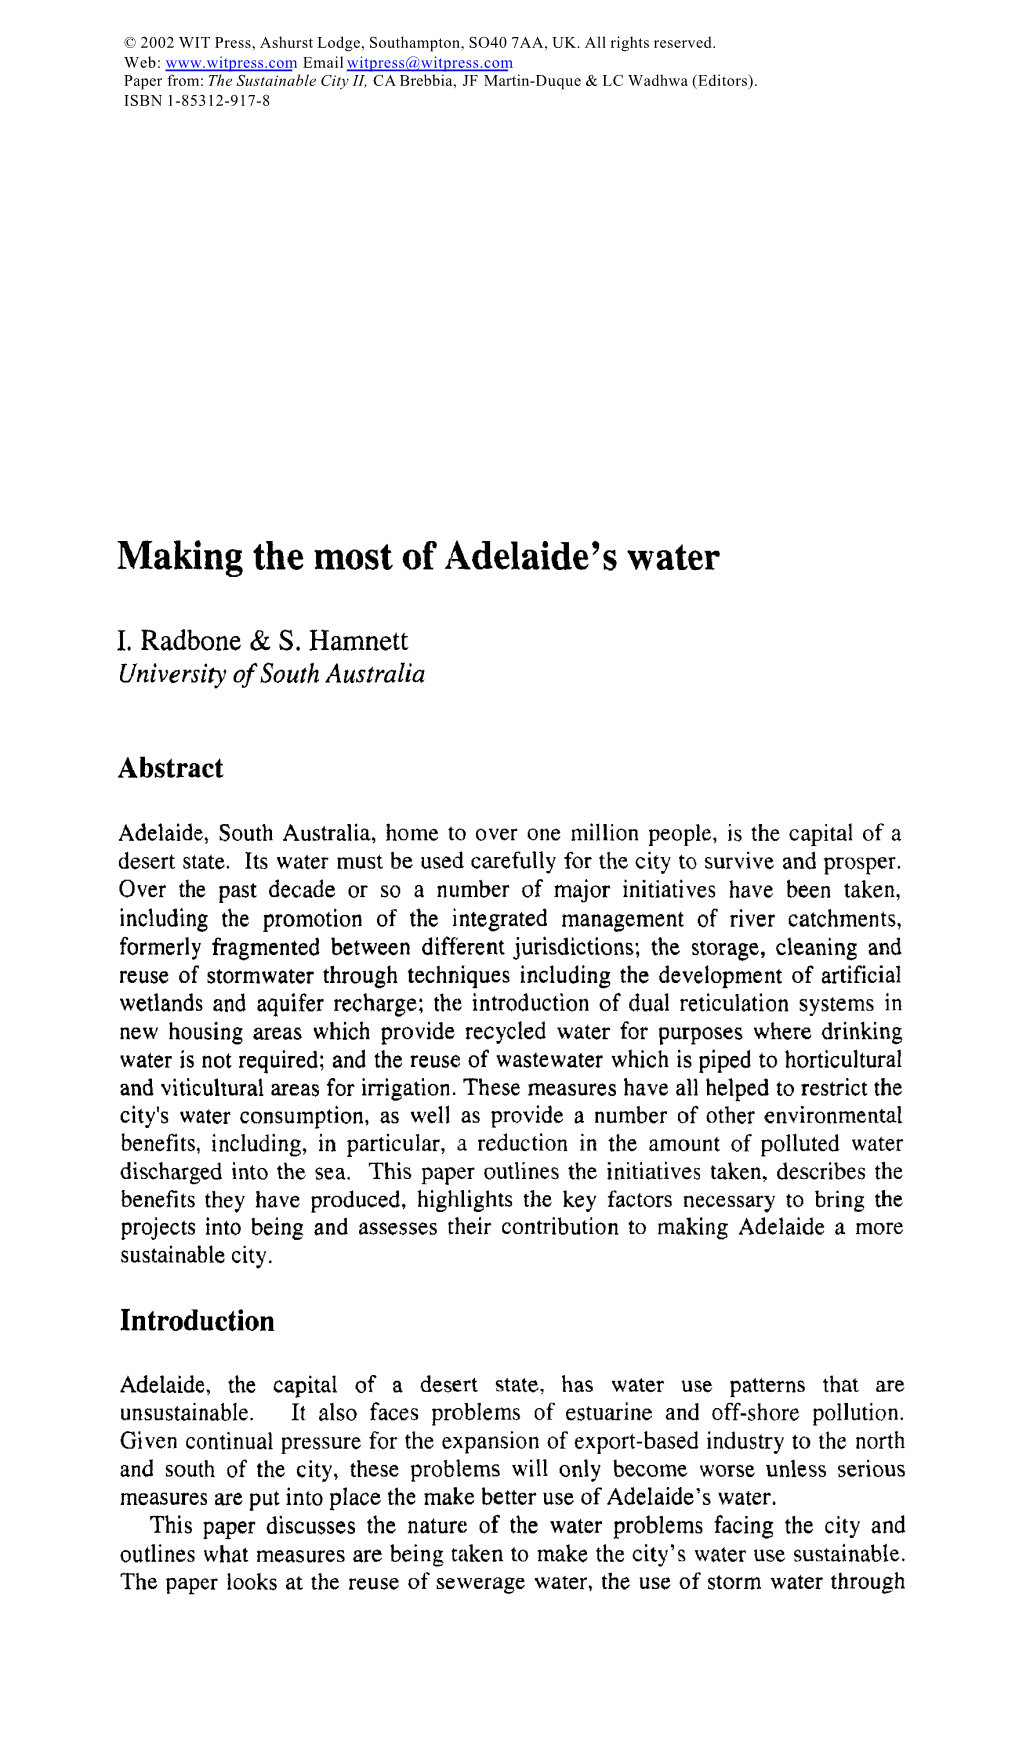 Making the Most of ,4Delaide's Water